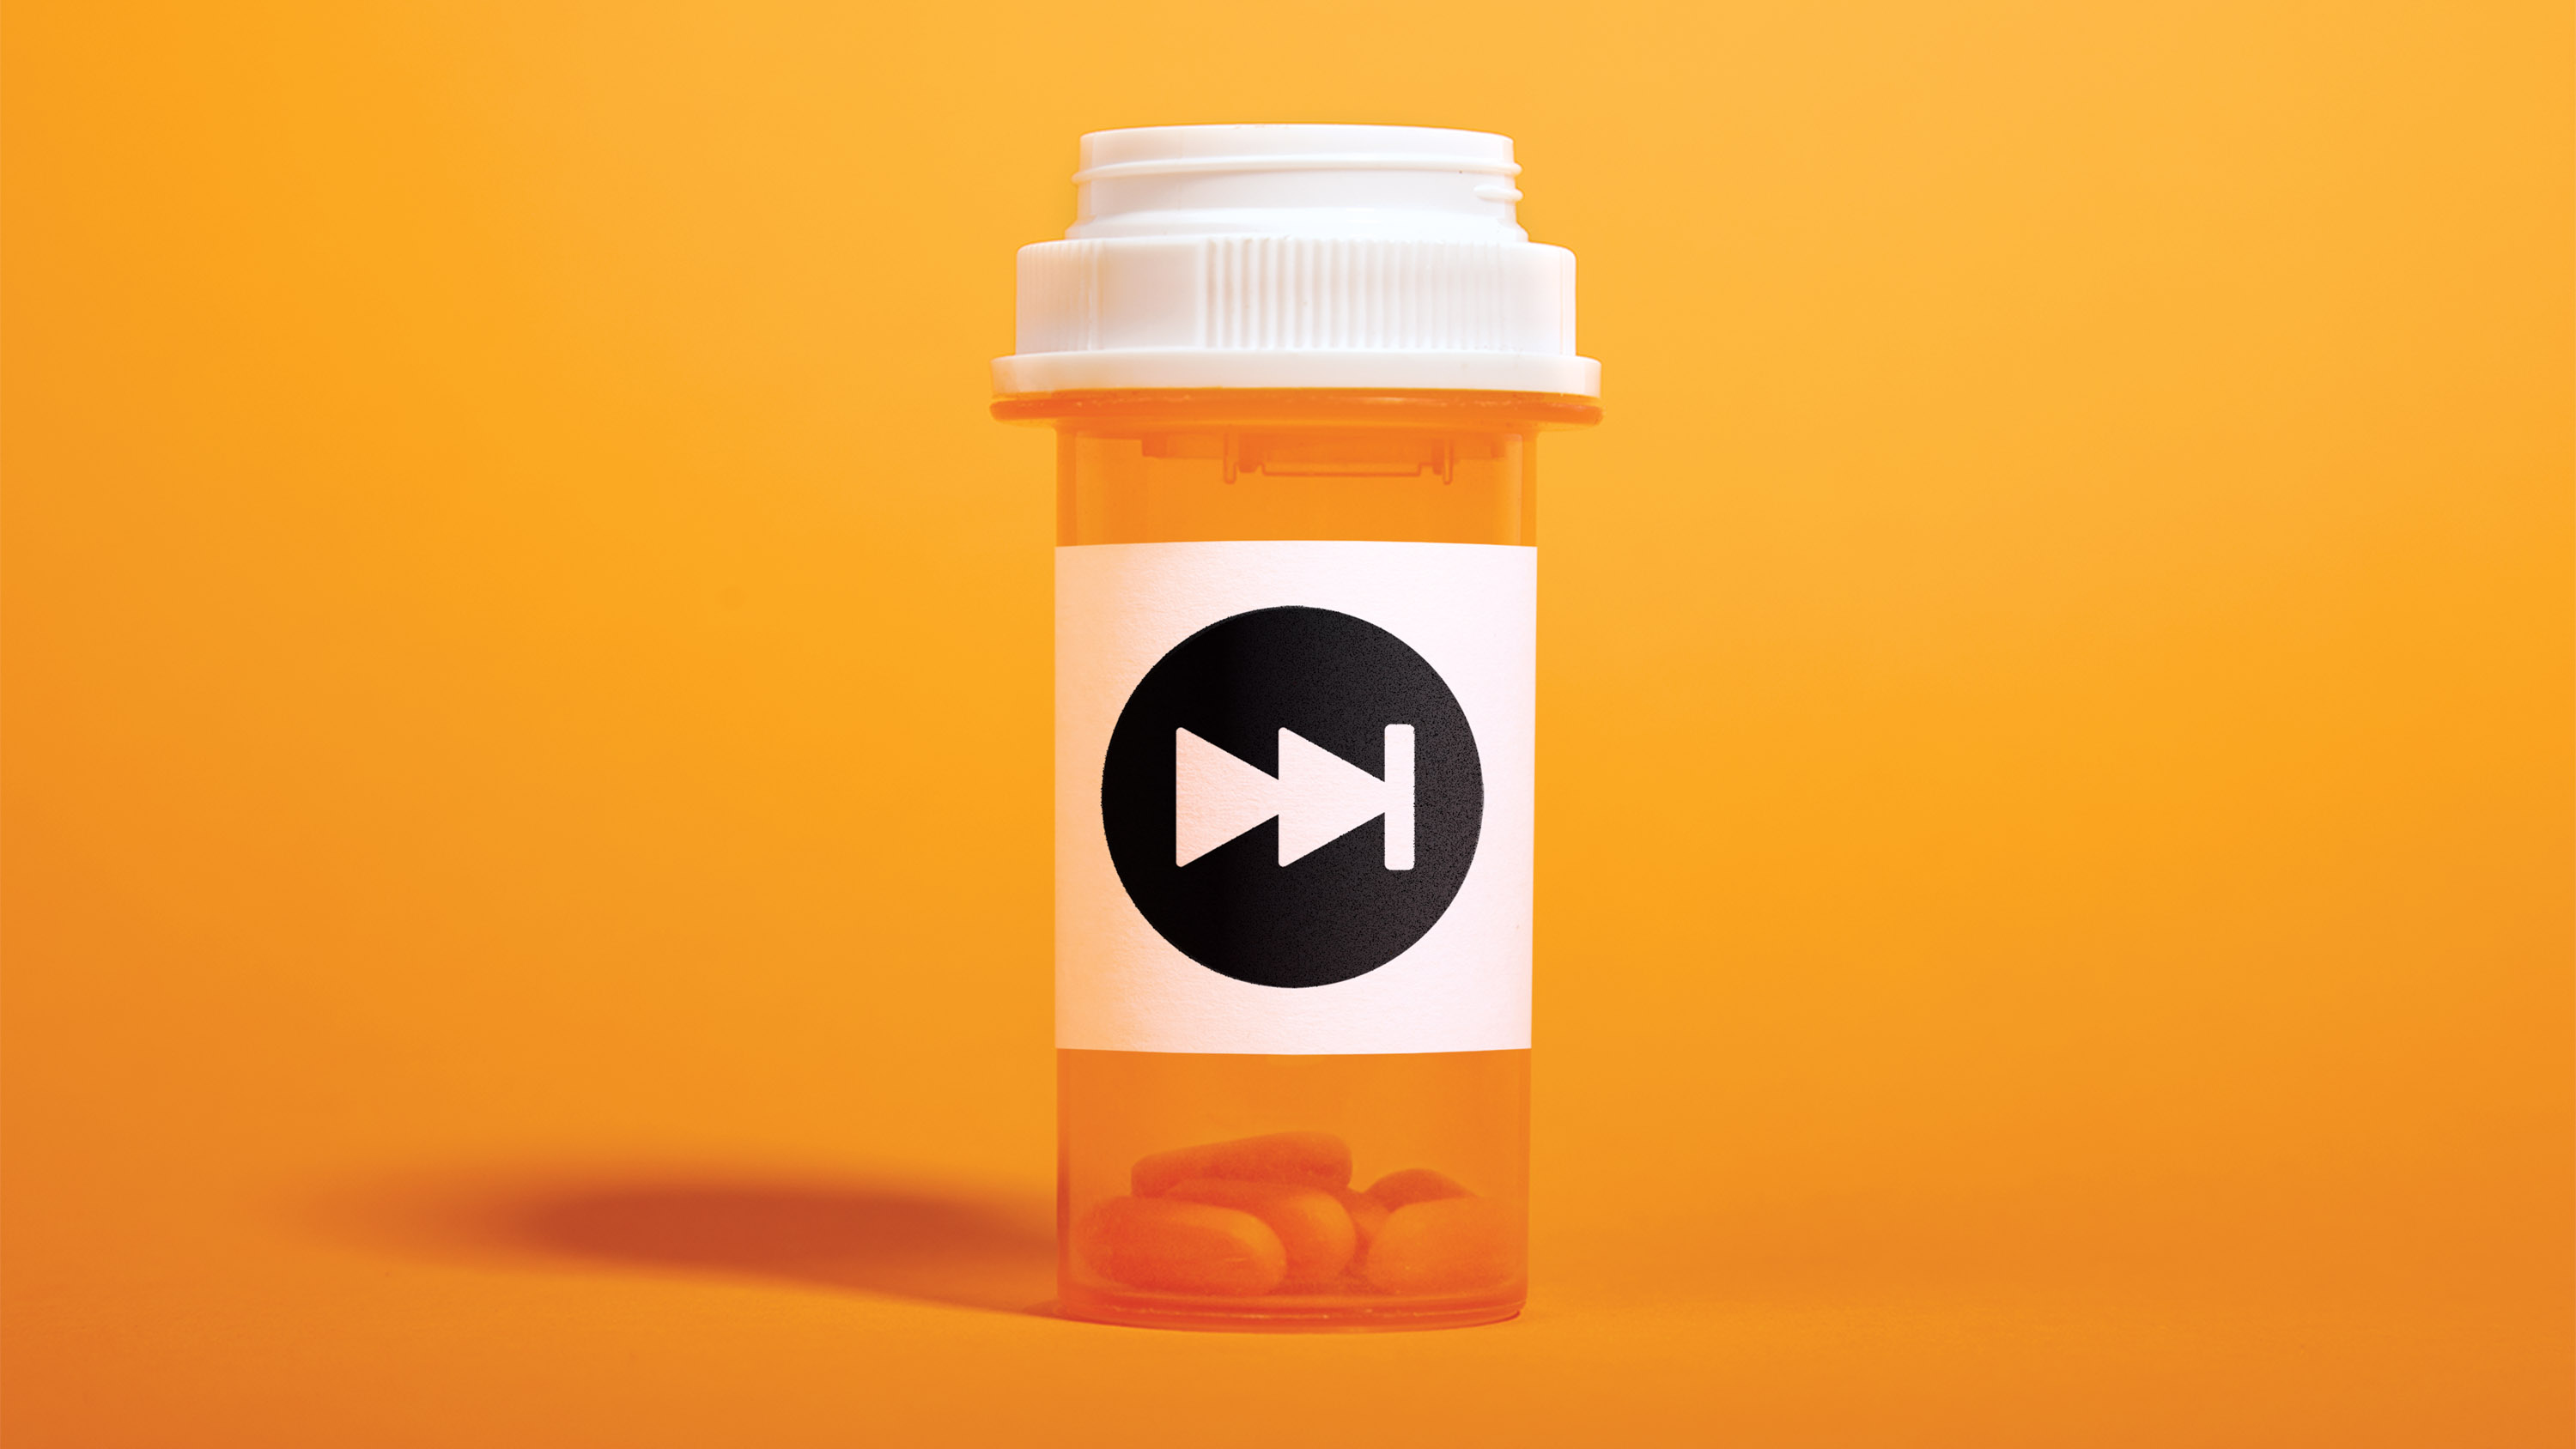 a bottle of pills with a &quot;fast forward&quot; icon on the label